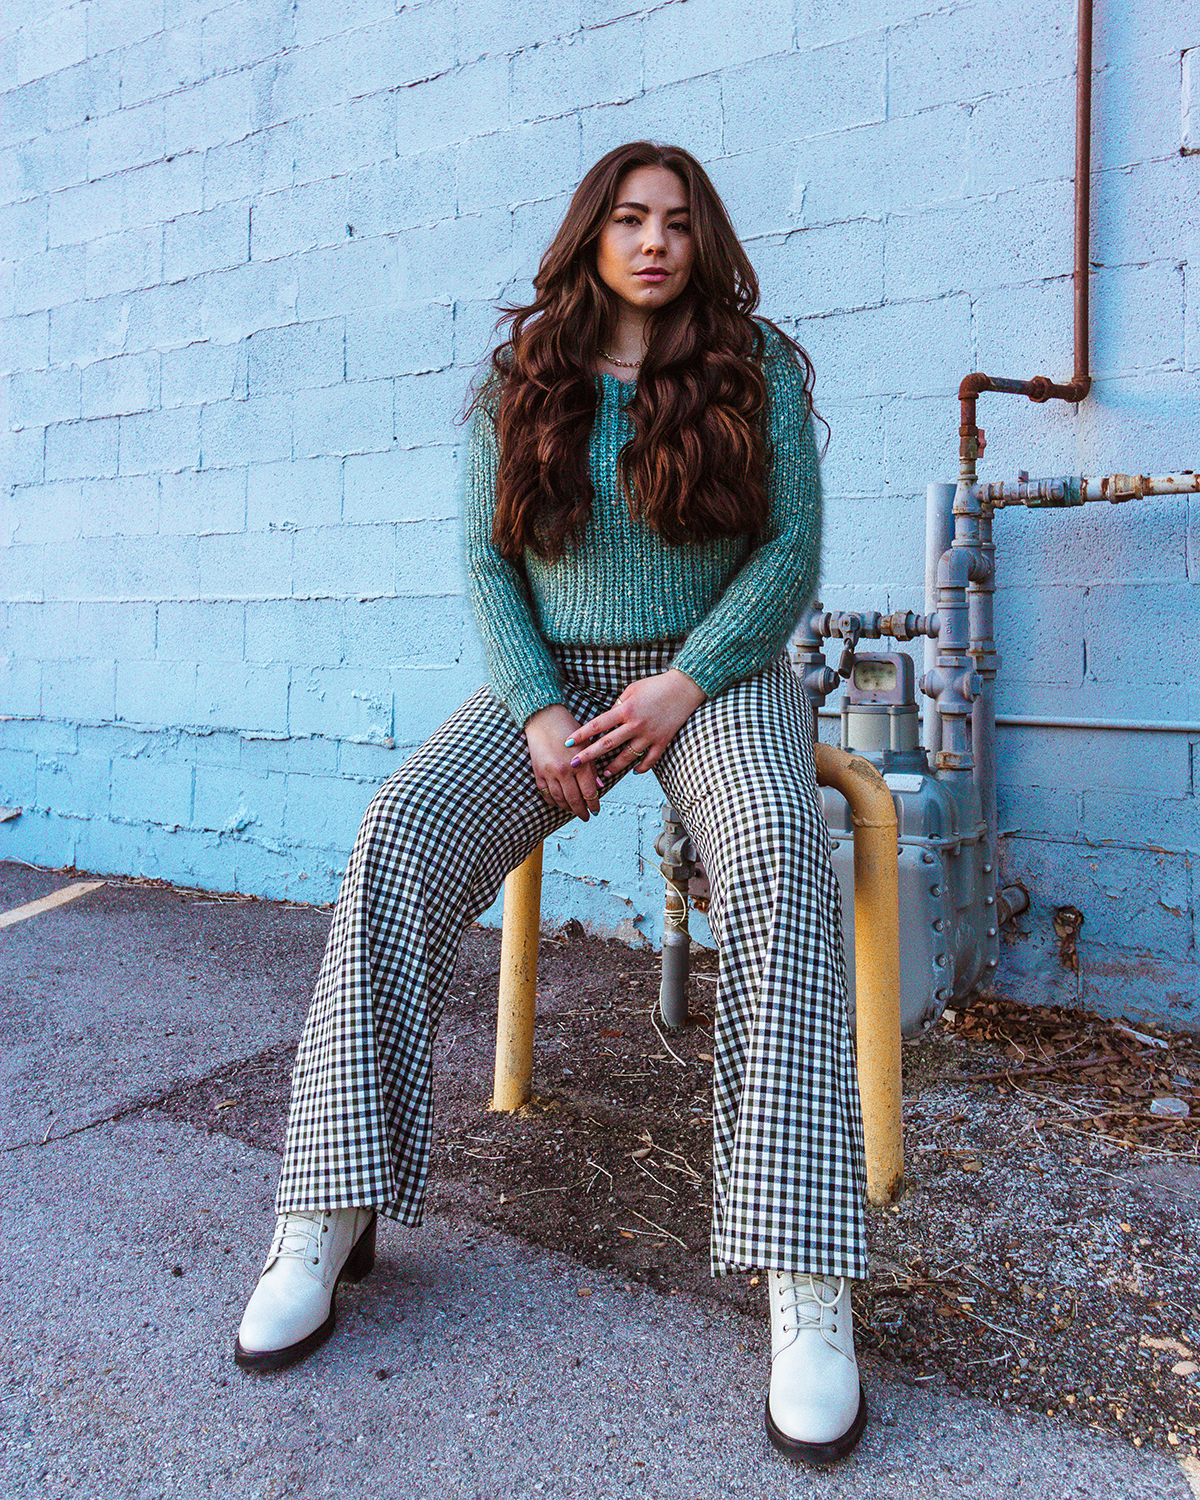 Lauryncakes sitting on a yellow pipe while wearing an oversized knit sweater and wide leg jeans